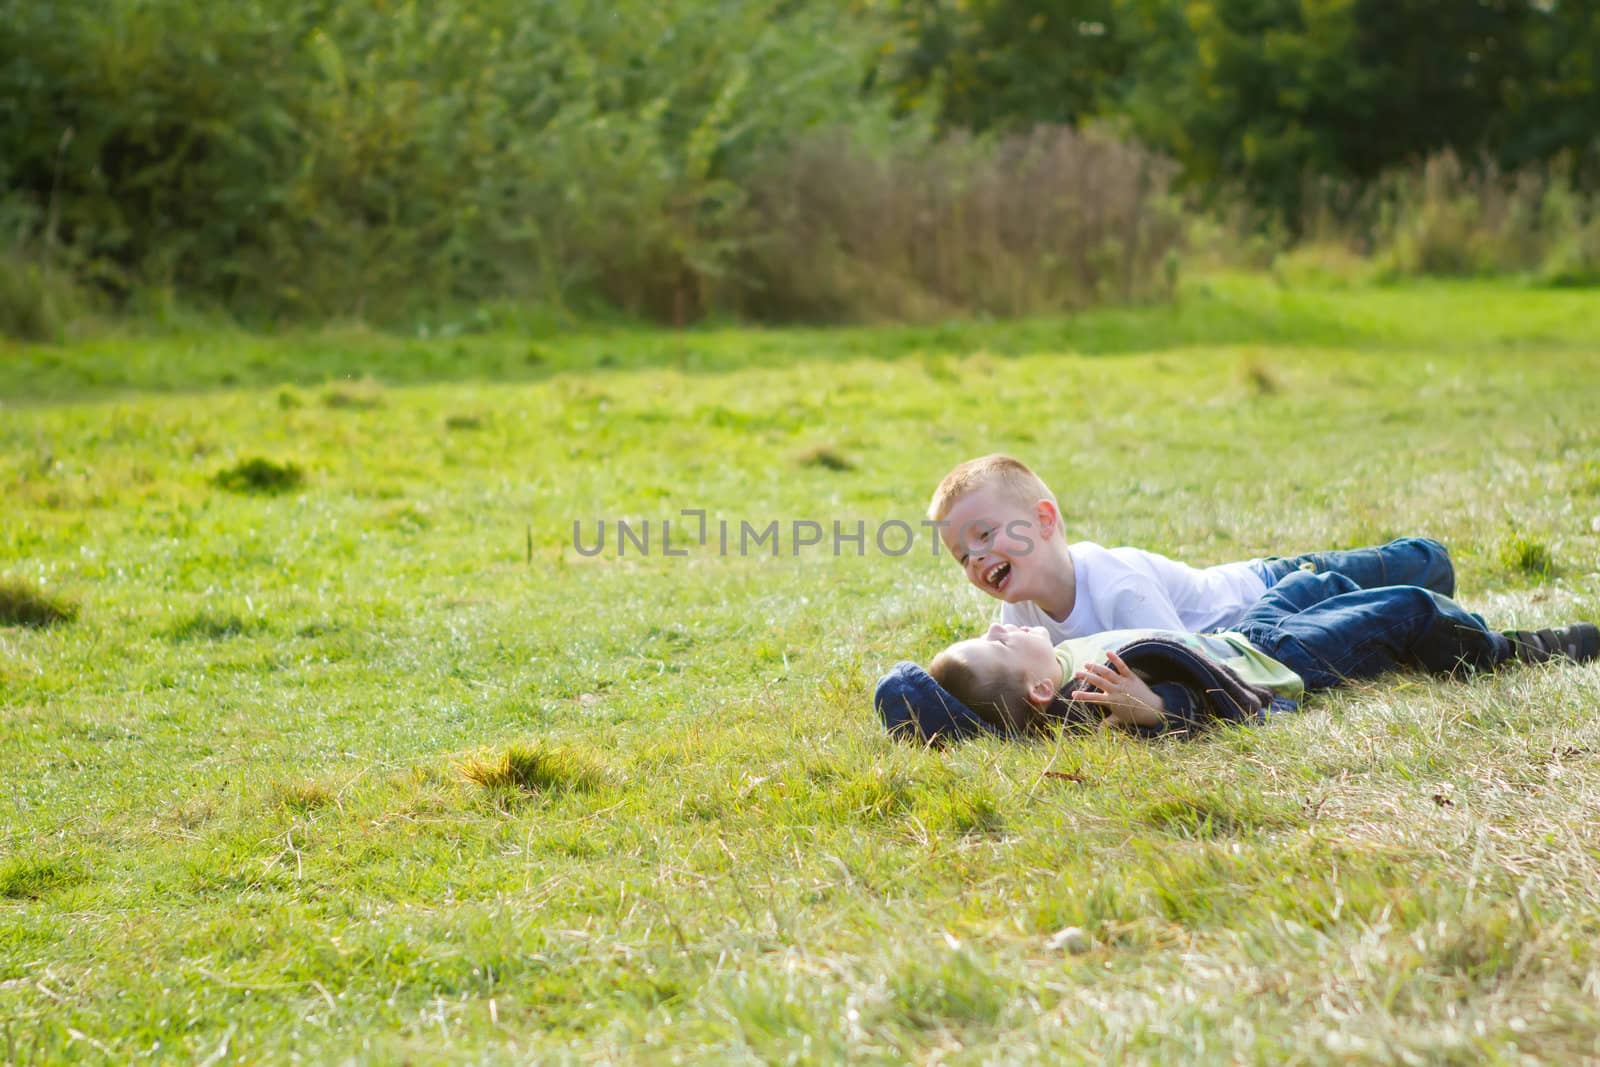 brothers playing in the summer meadow by smikeymikey1